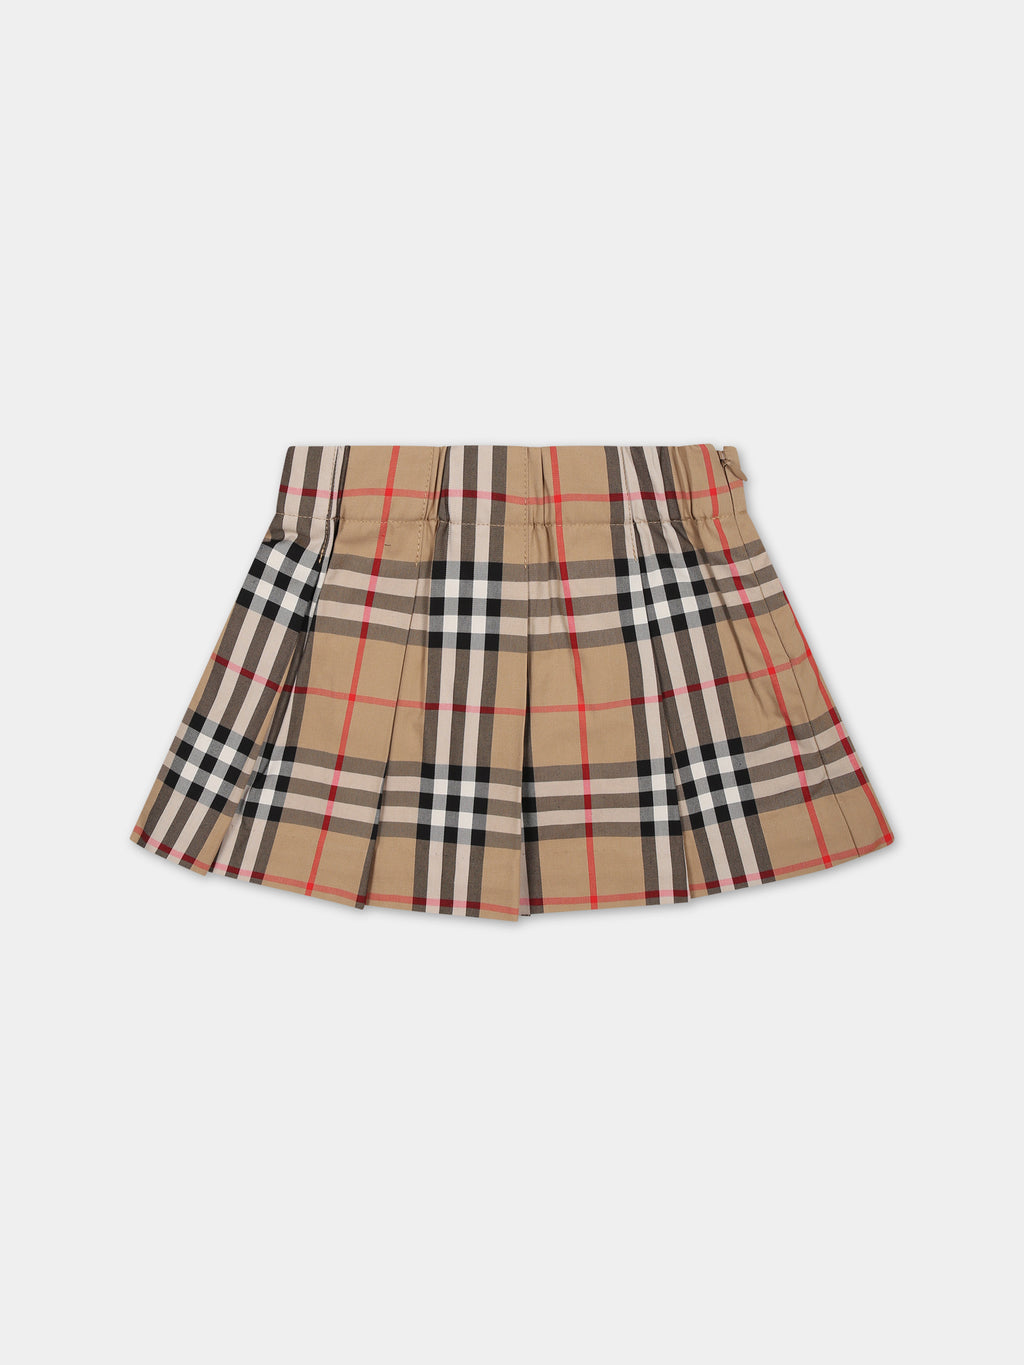 Beige skirt for baby girl with iconic all-over vintage check